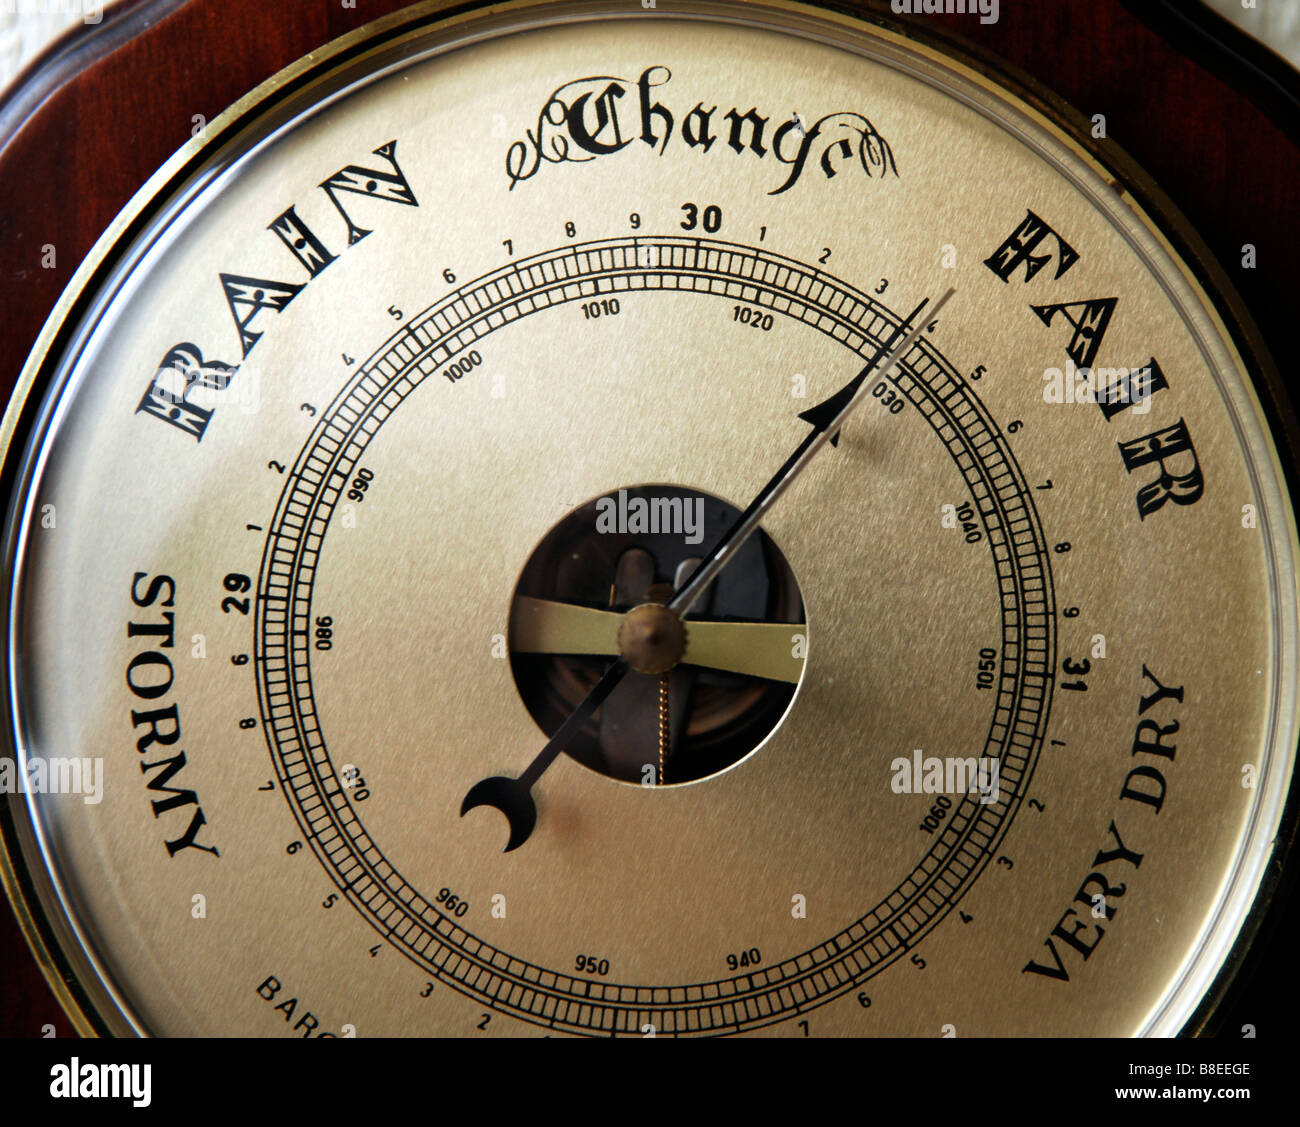 A barometer used for weather forecasting measuring the barometric pressure Stock Photo